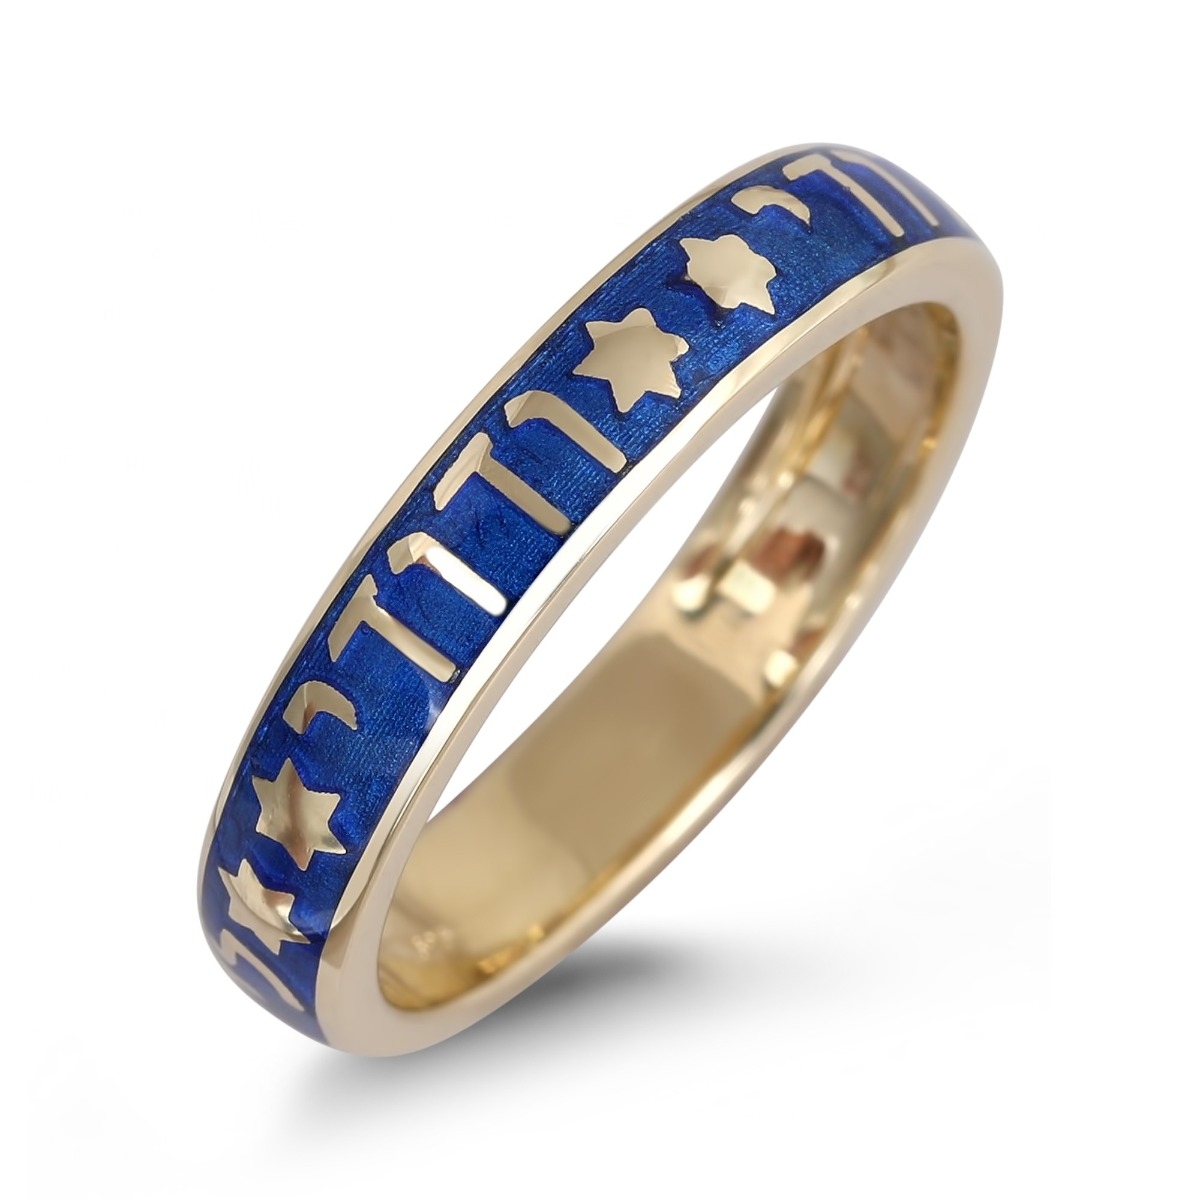 14K Gold and Blue Enamel My Beloved Ring with Stars of David - 1